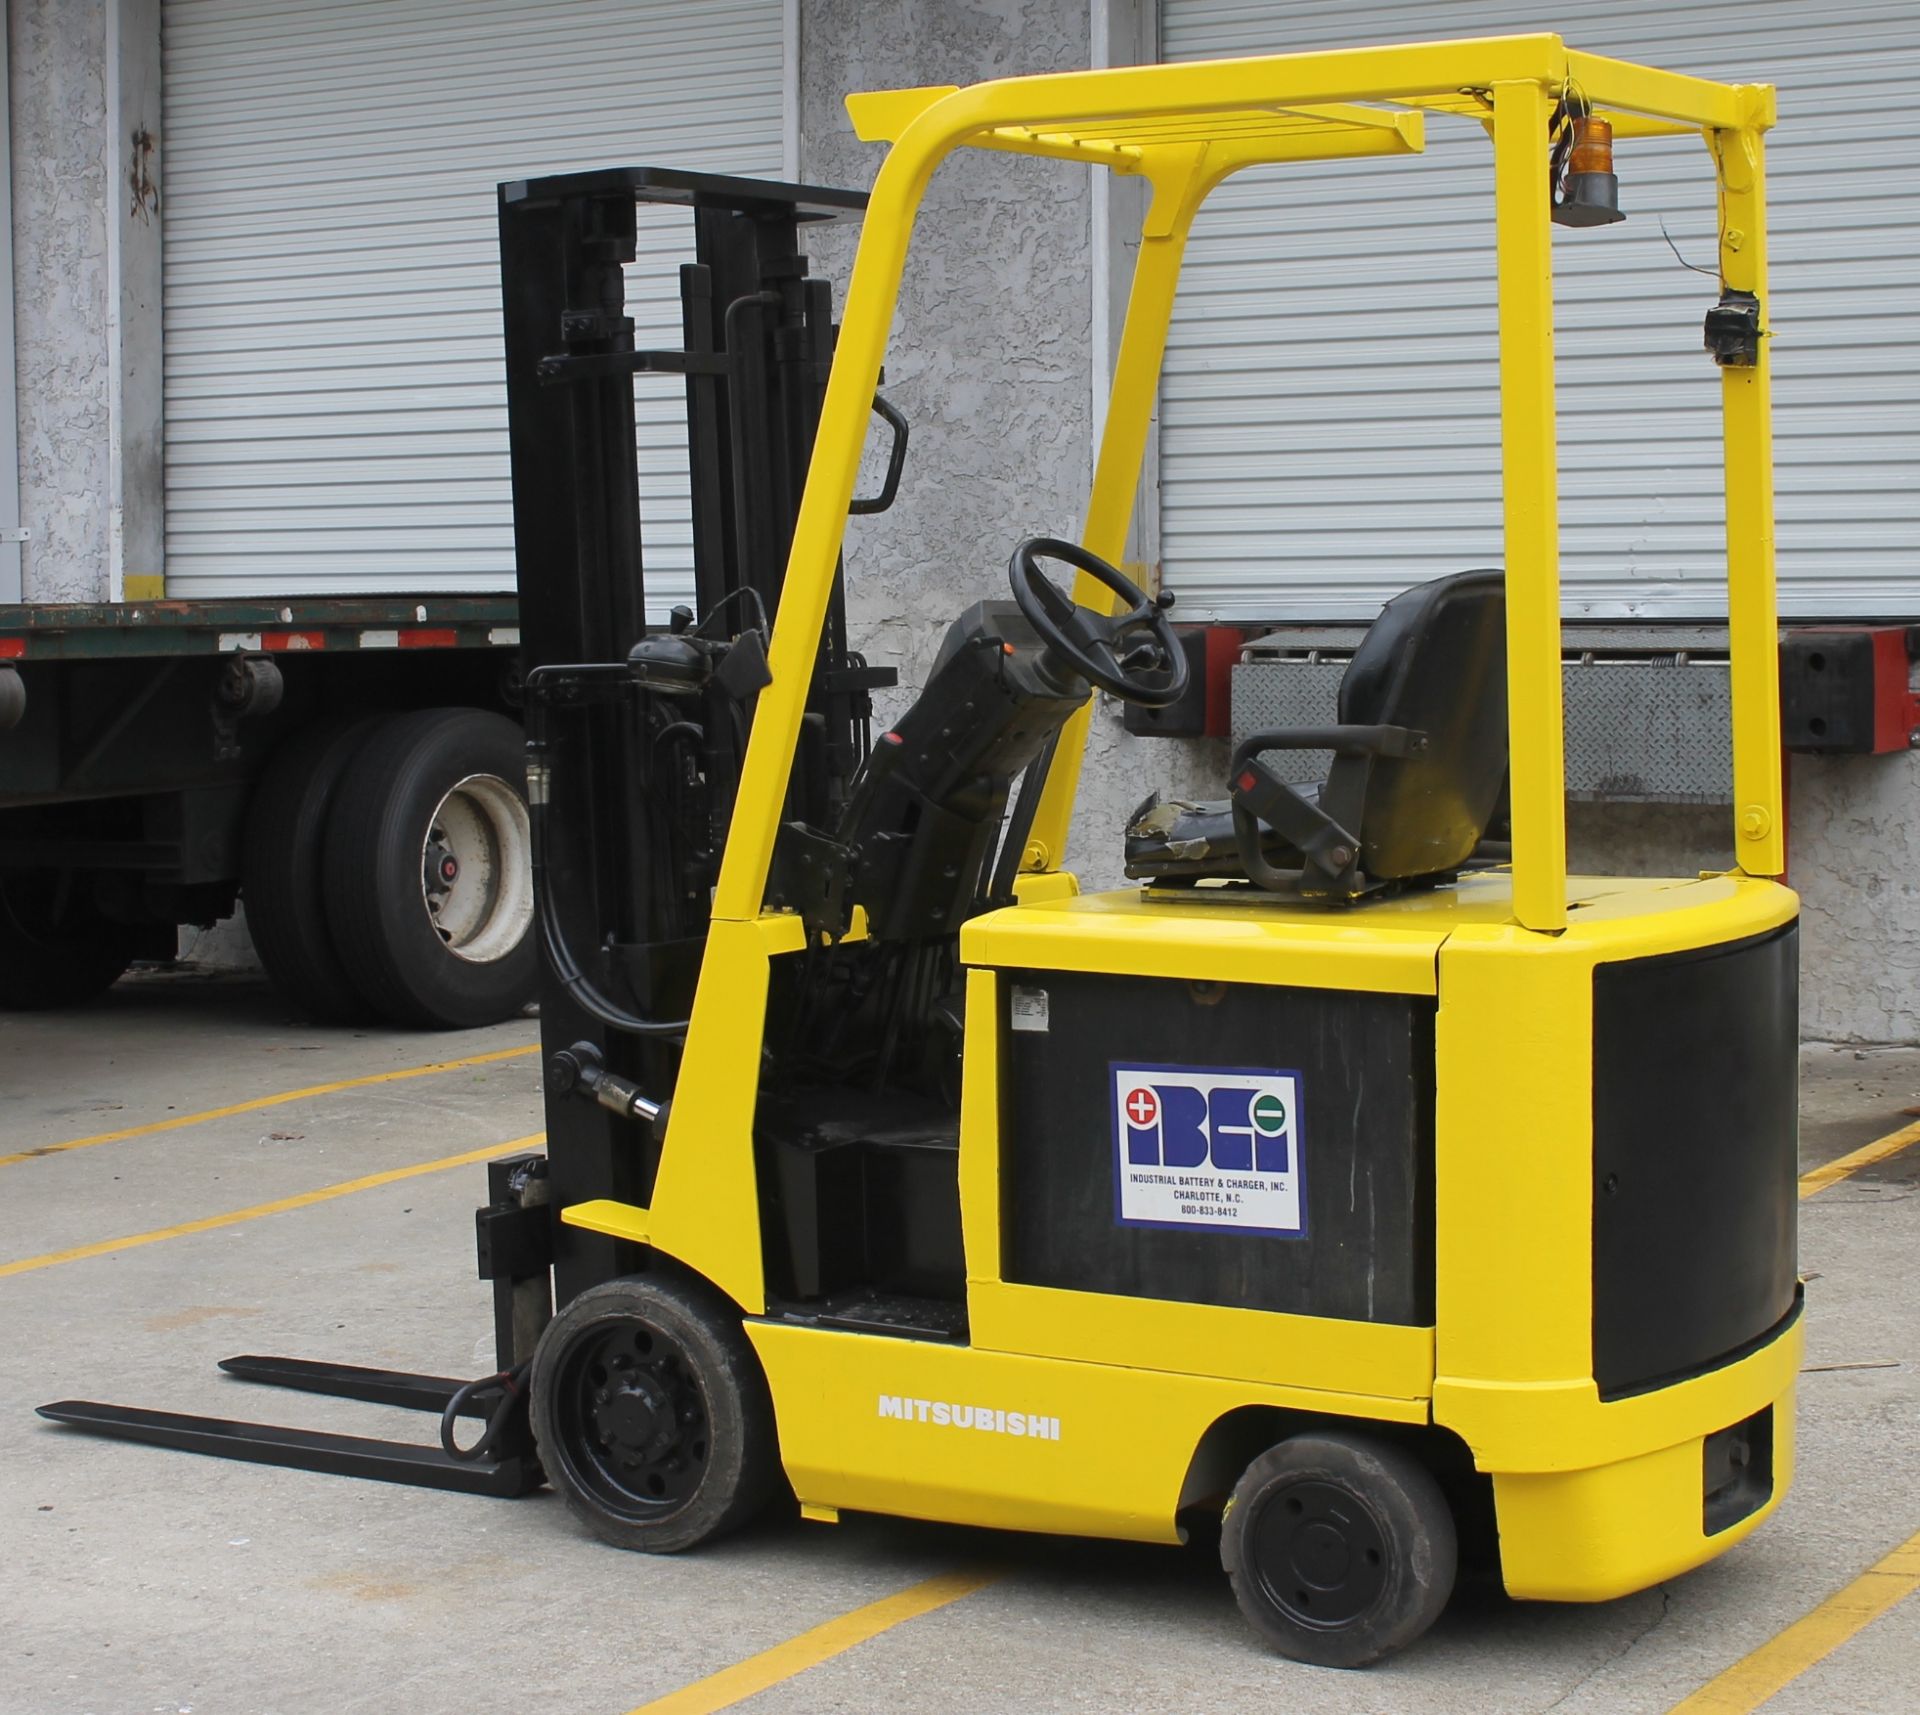 MITSUBISHI 3000 LBS CAPACITY ELECTRIC FORKLIFT, MODEL: 2FBC15, CAPACITY: 3000 LBS., MAX HEIGHT: - Image 2 of 6